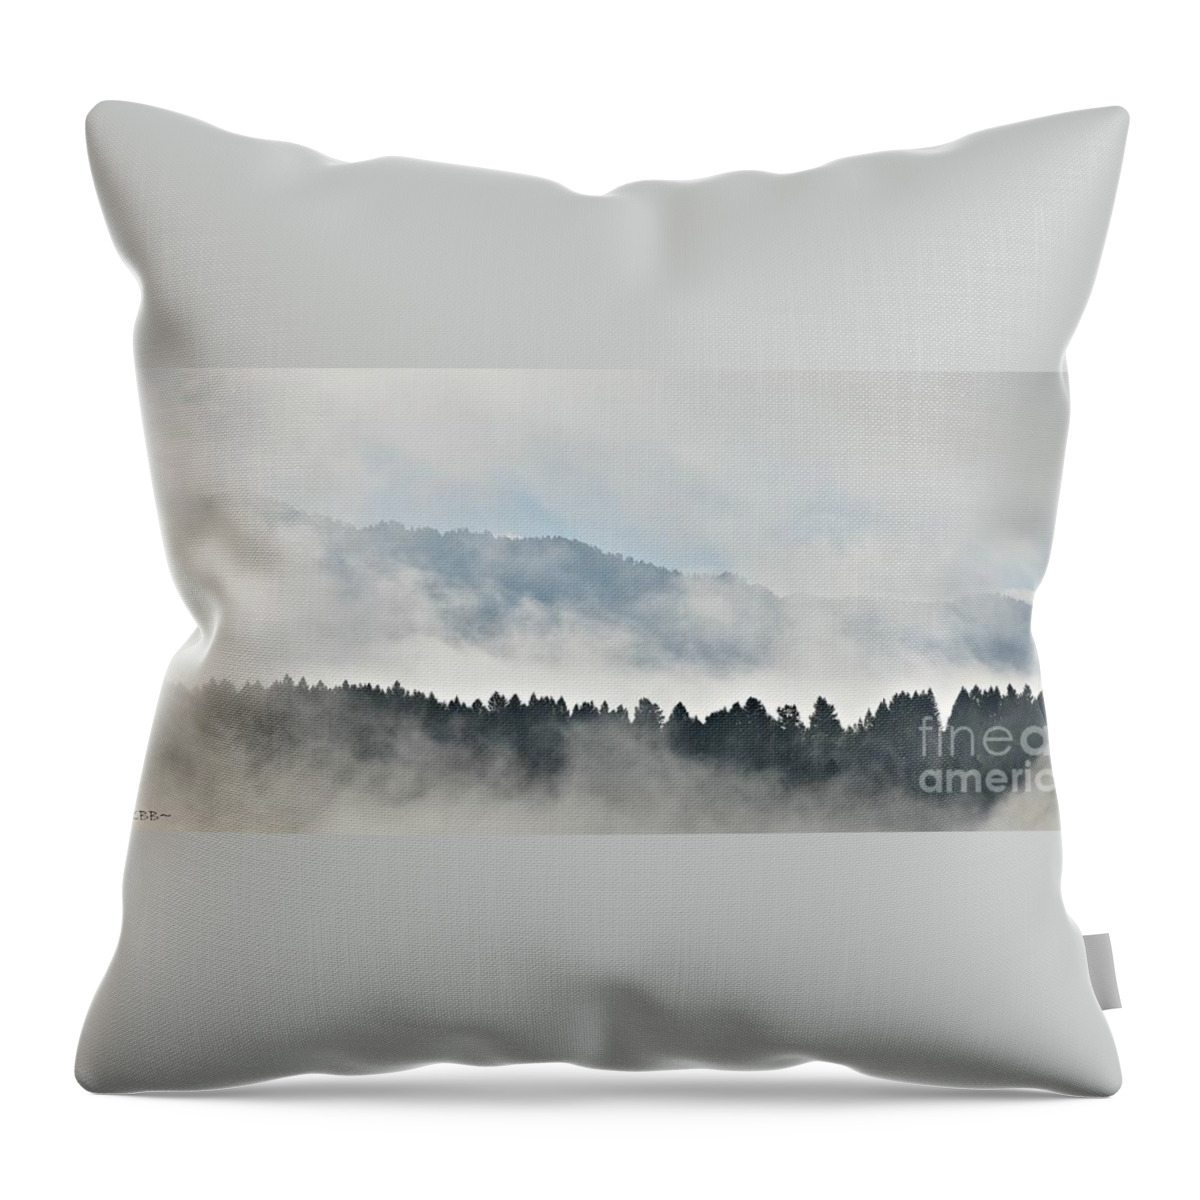 Clouds Throw Pillow featuring the photograph Here There Be Dragons by Dorrene BrownButterfield